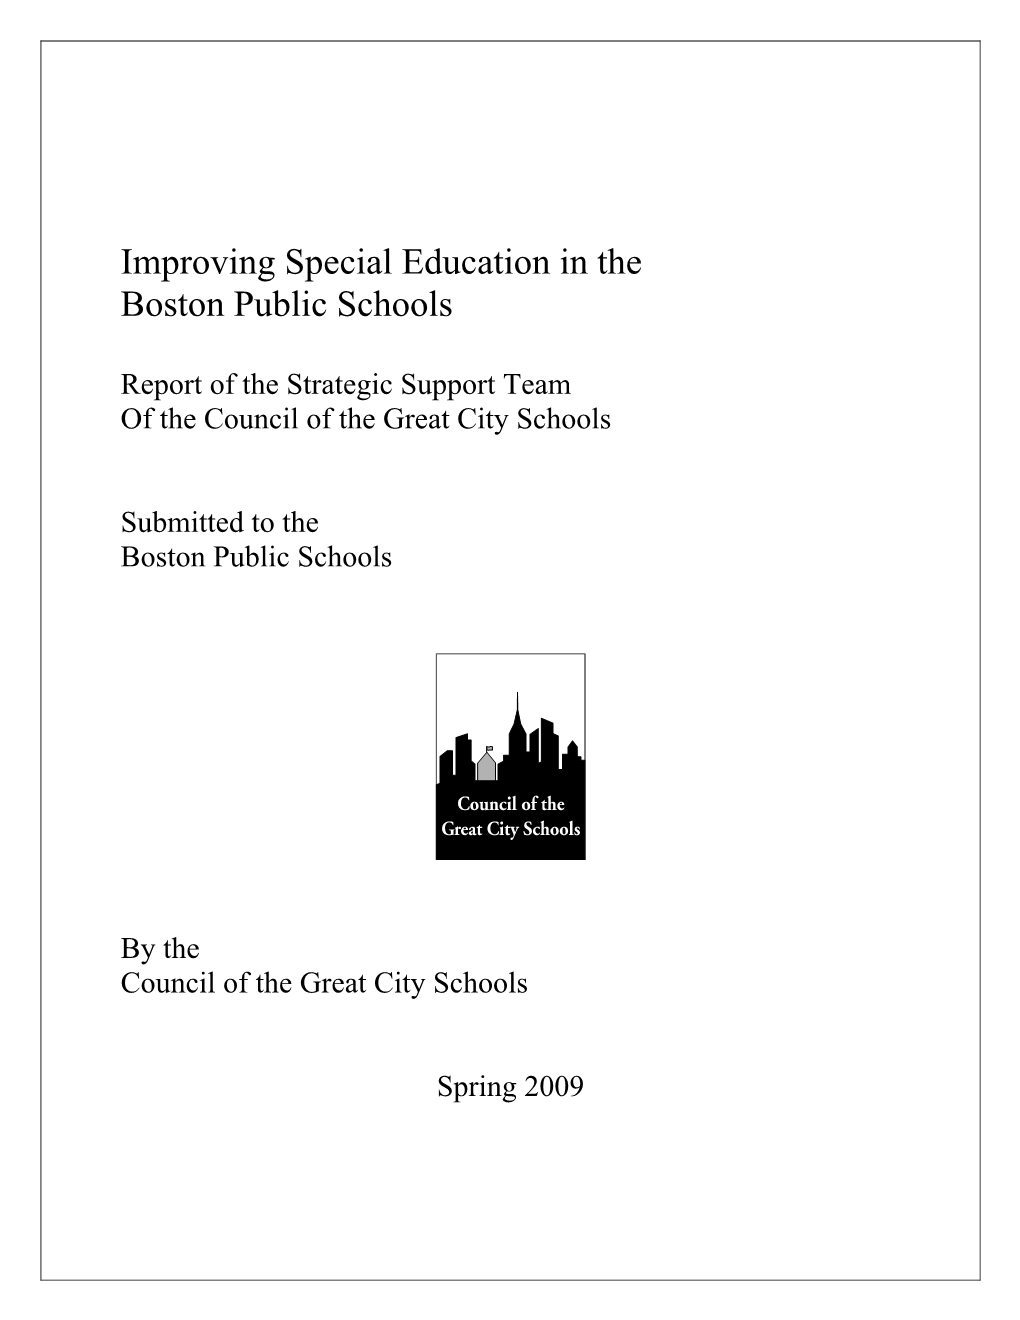 Improving Special Education in the Boston Public Schools: Report of the Strategic Support Team Of